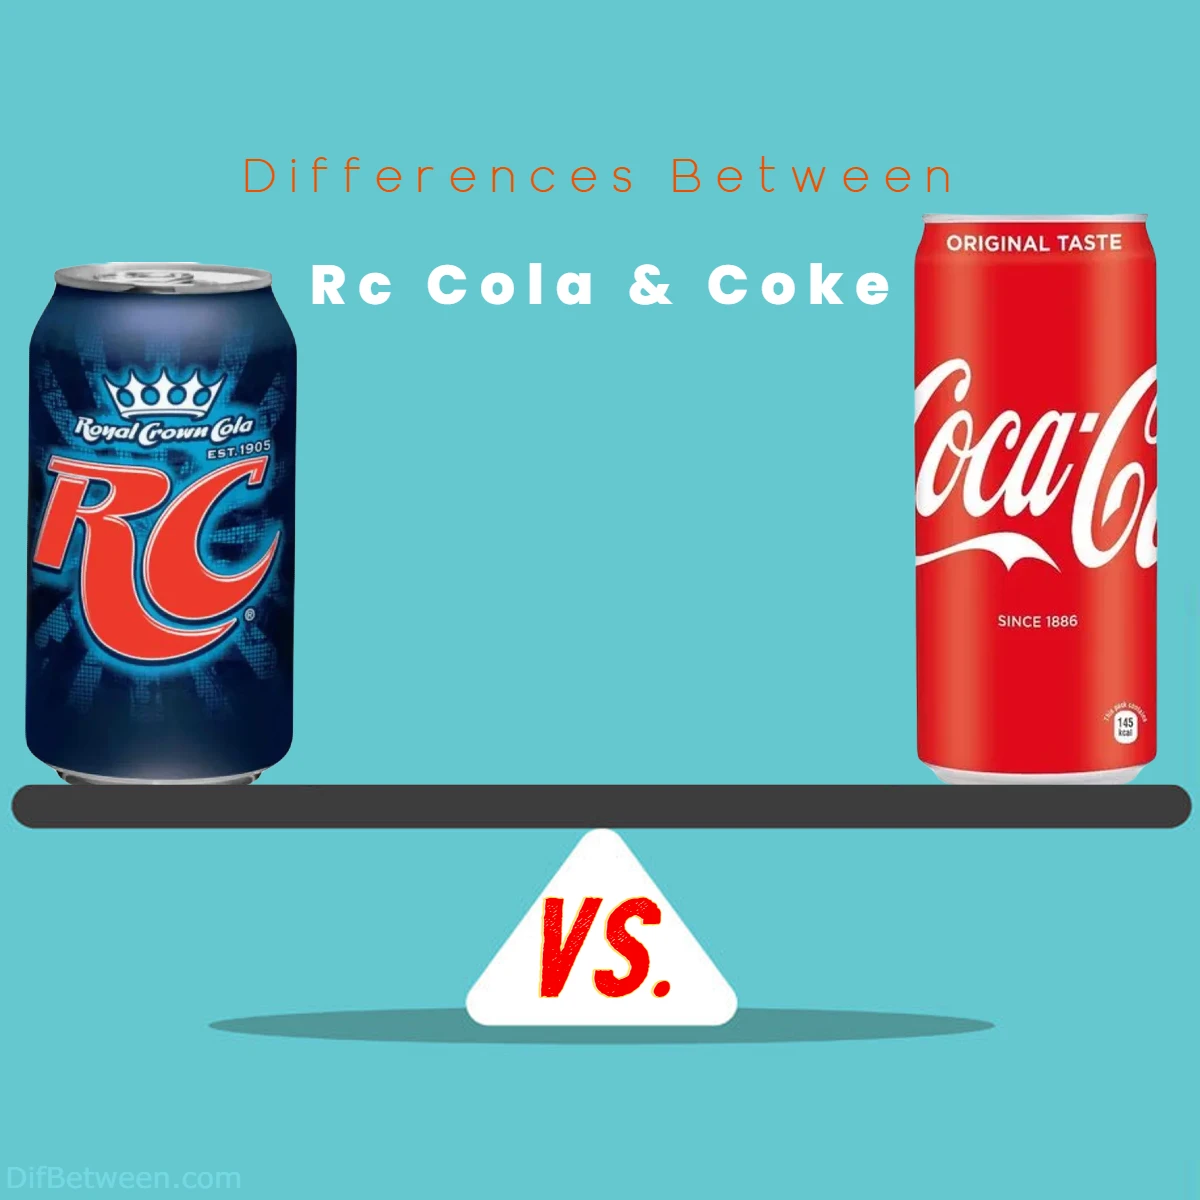 Differences Between Coke and Rc Cola